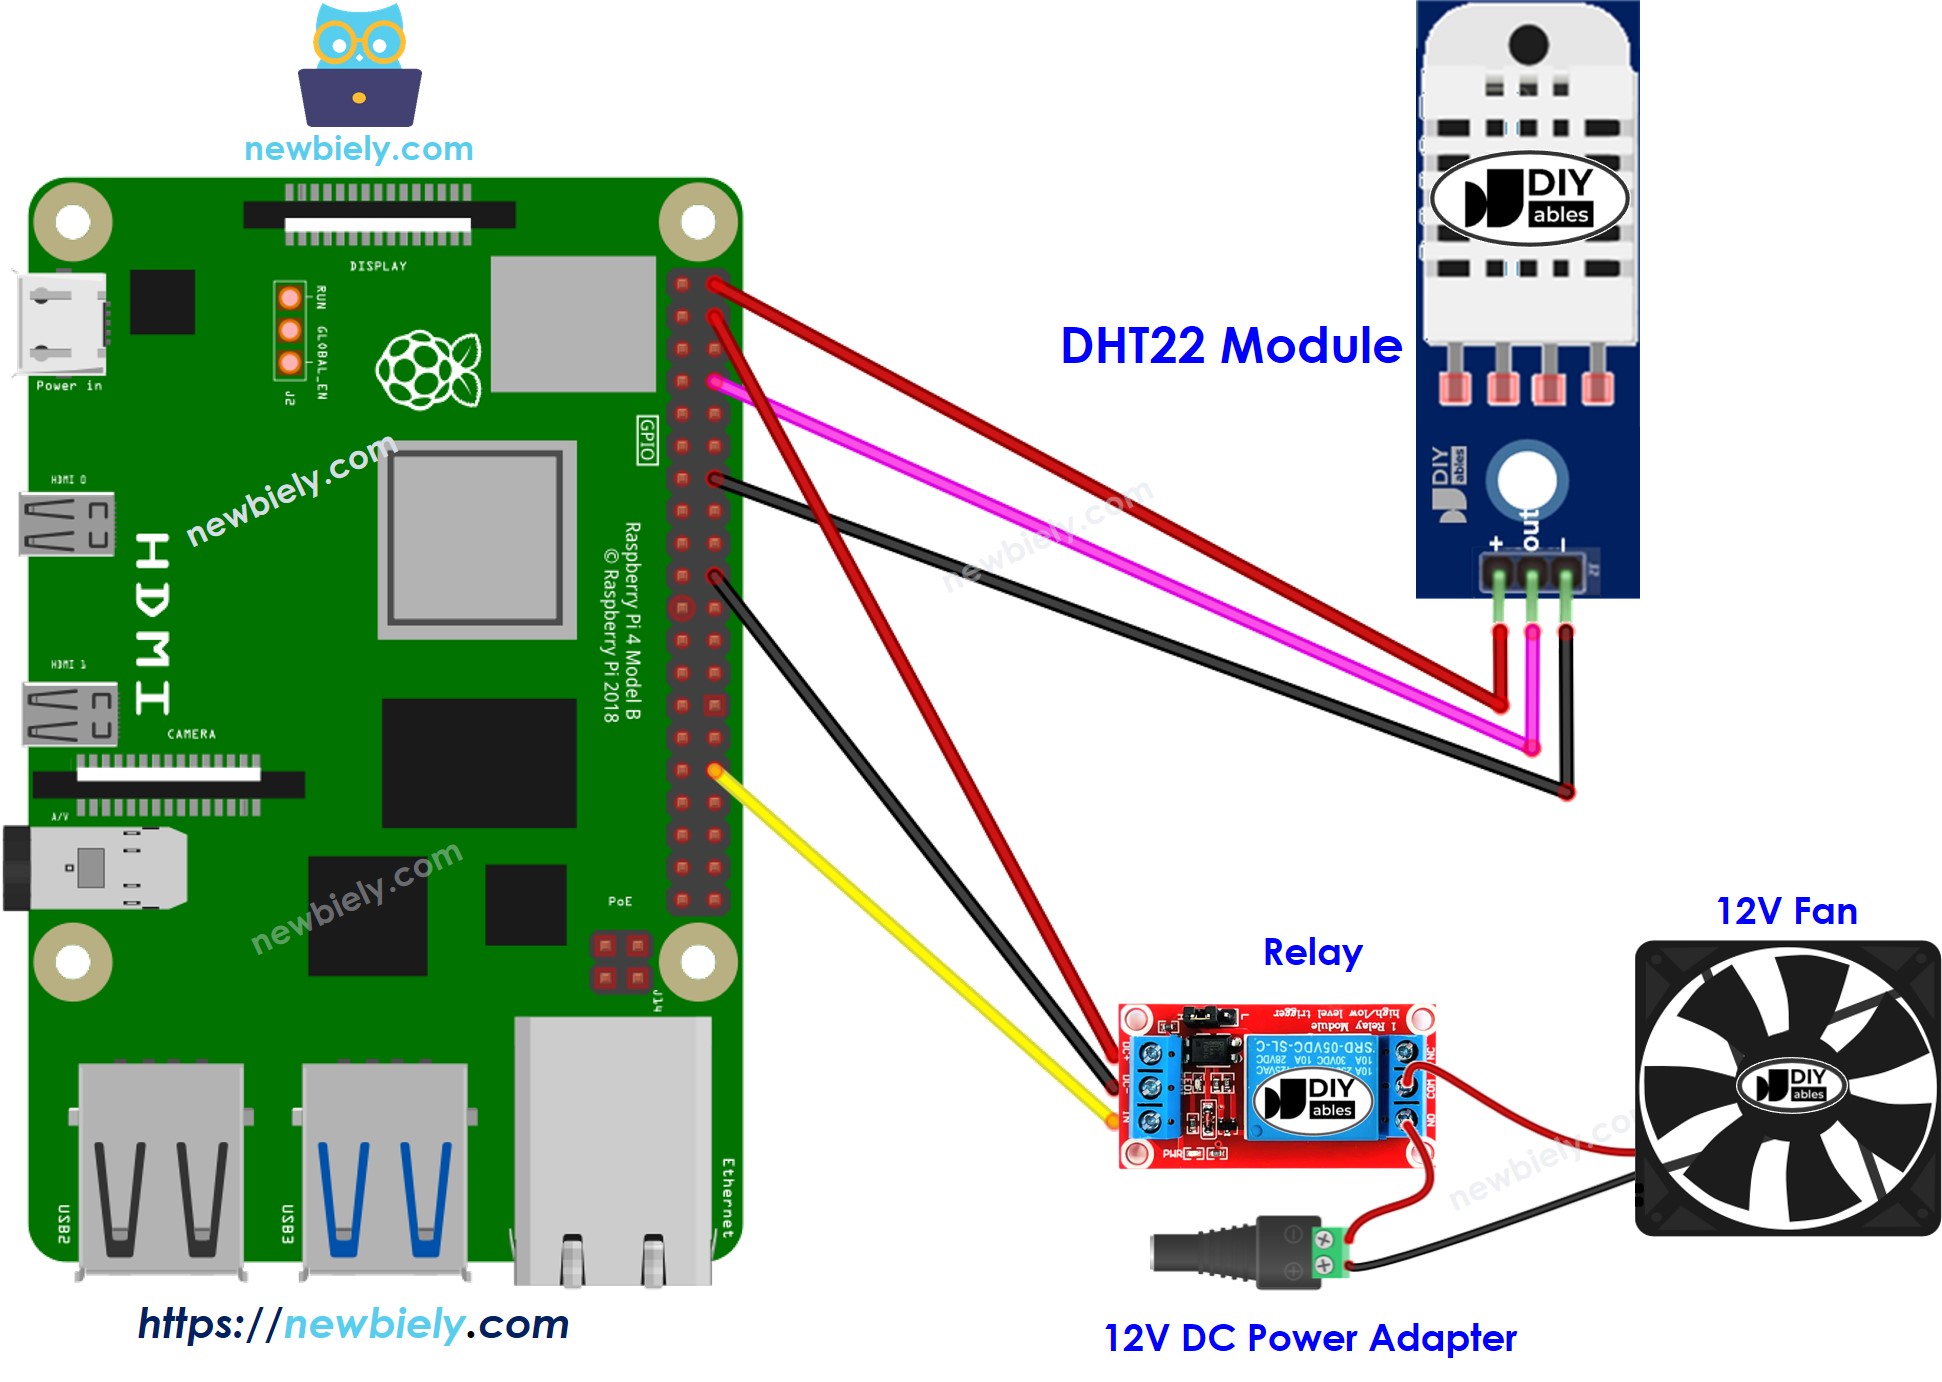 The wiring diagram between Raspberry Pi and DHT22 cooling fan system